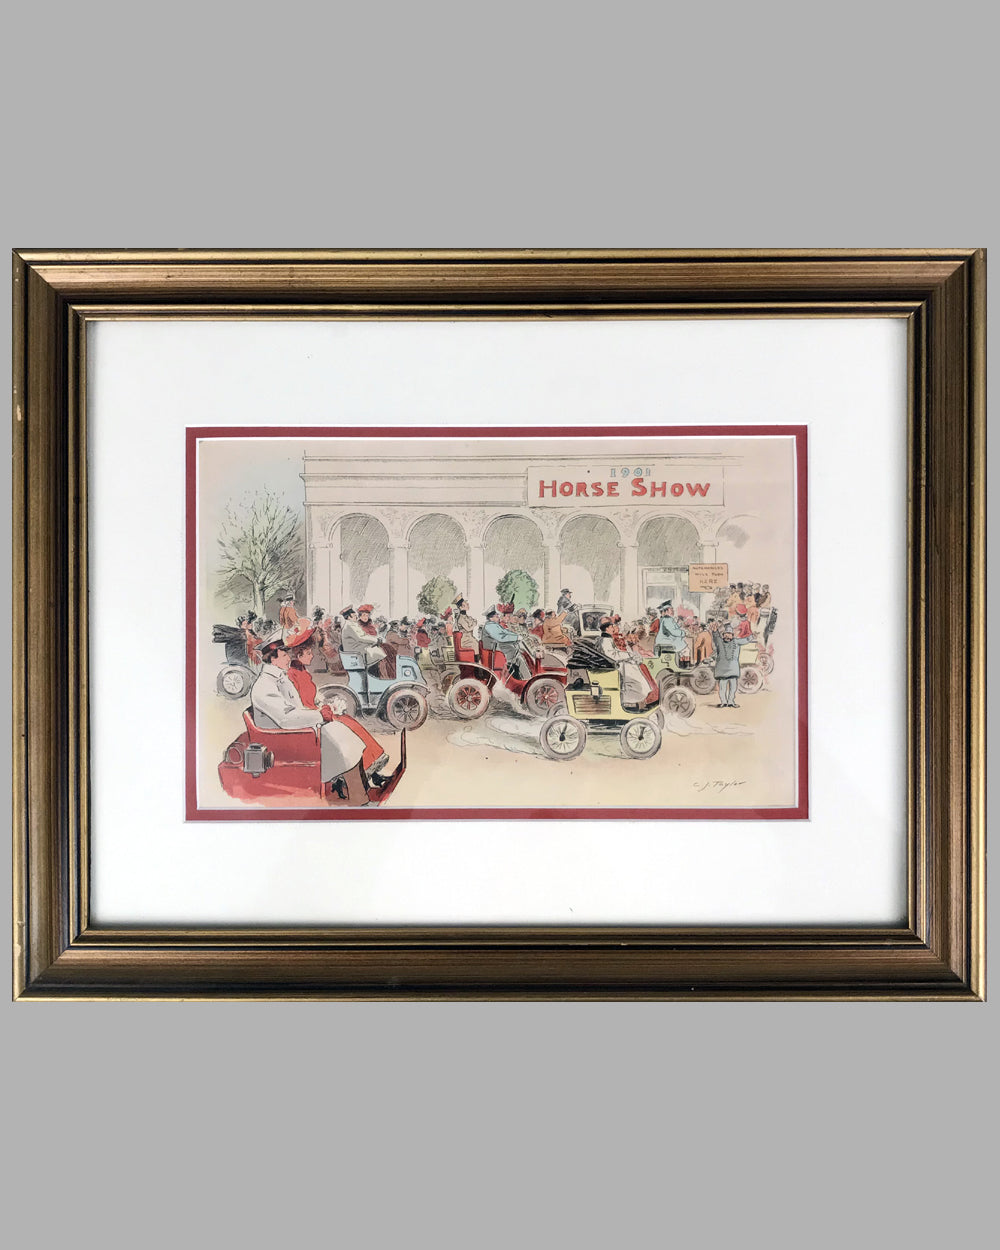 Horseless Carriages Arrive at the Horse Show 1901 period lithograph by C. J. Taylor